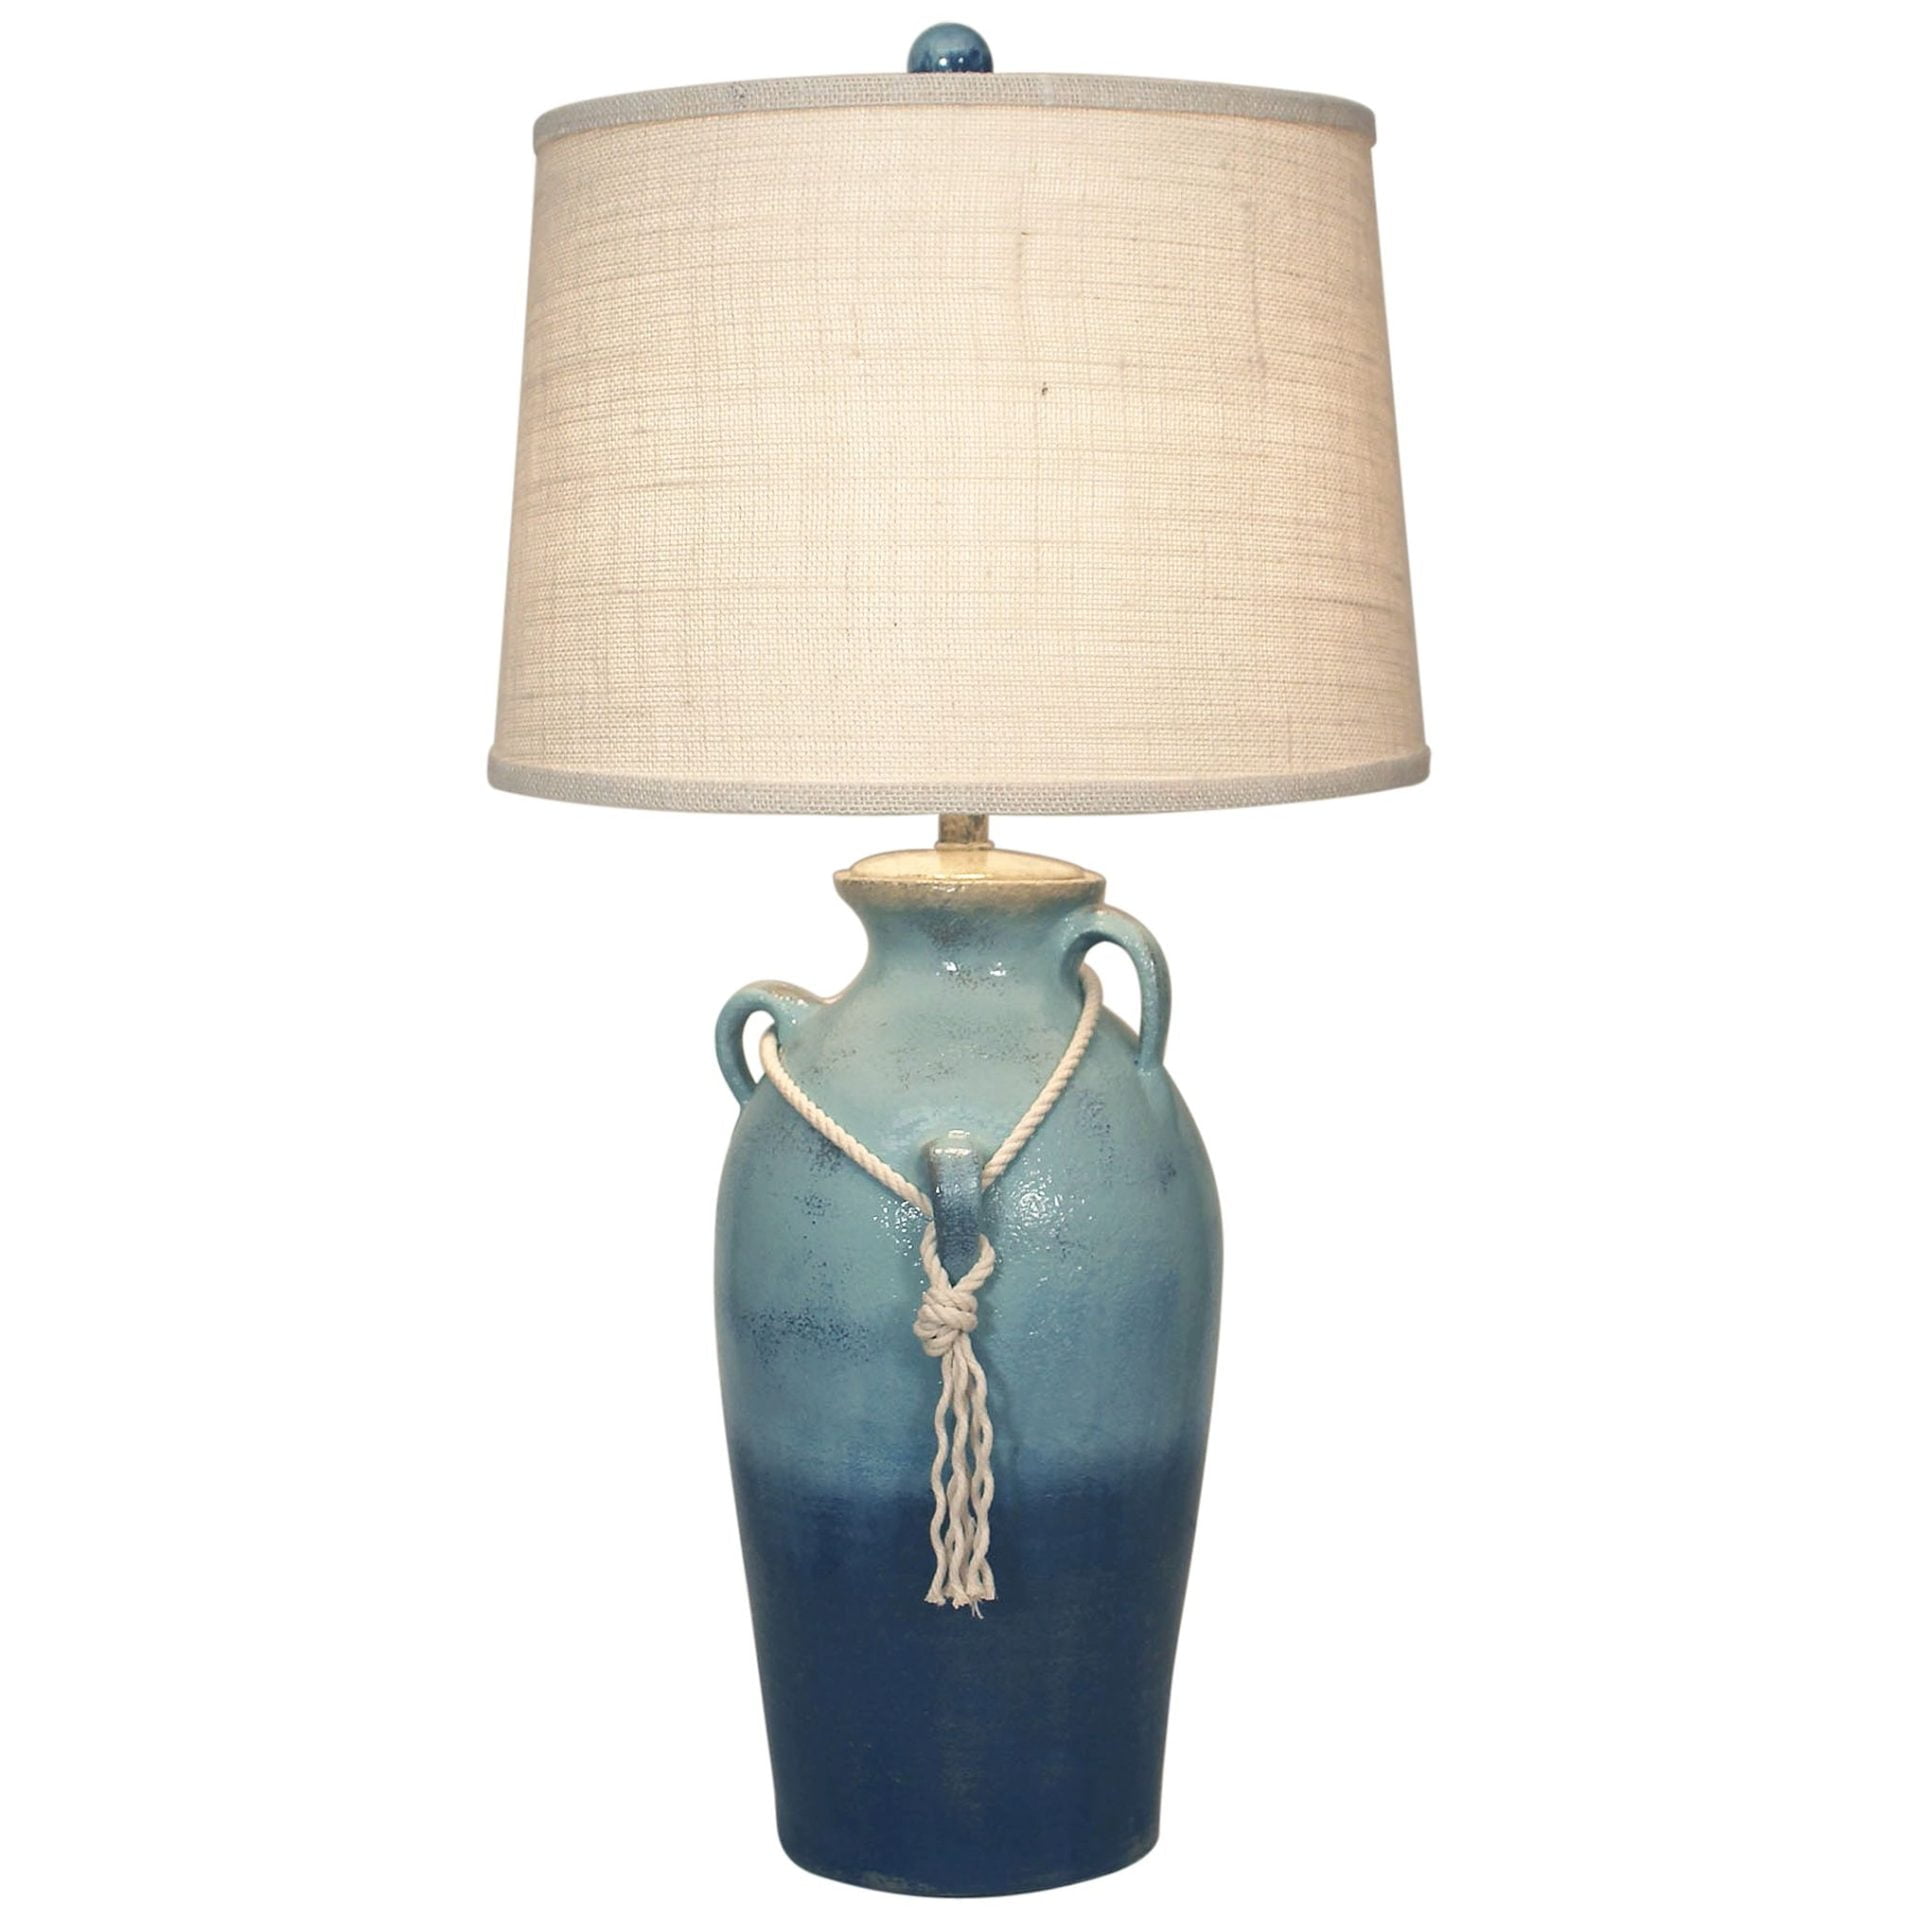 3-Handle Jug Table Lamp with White Rope